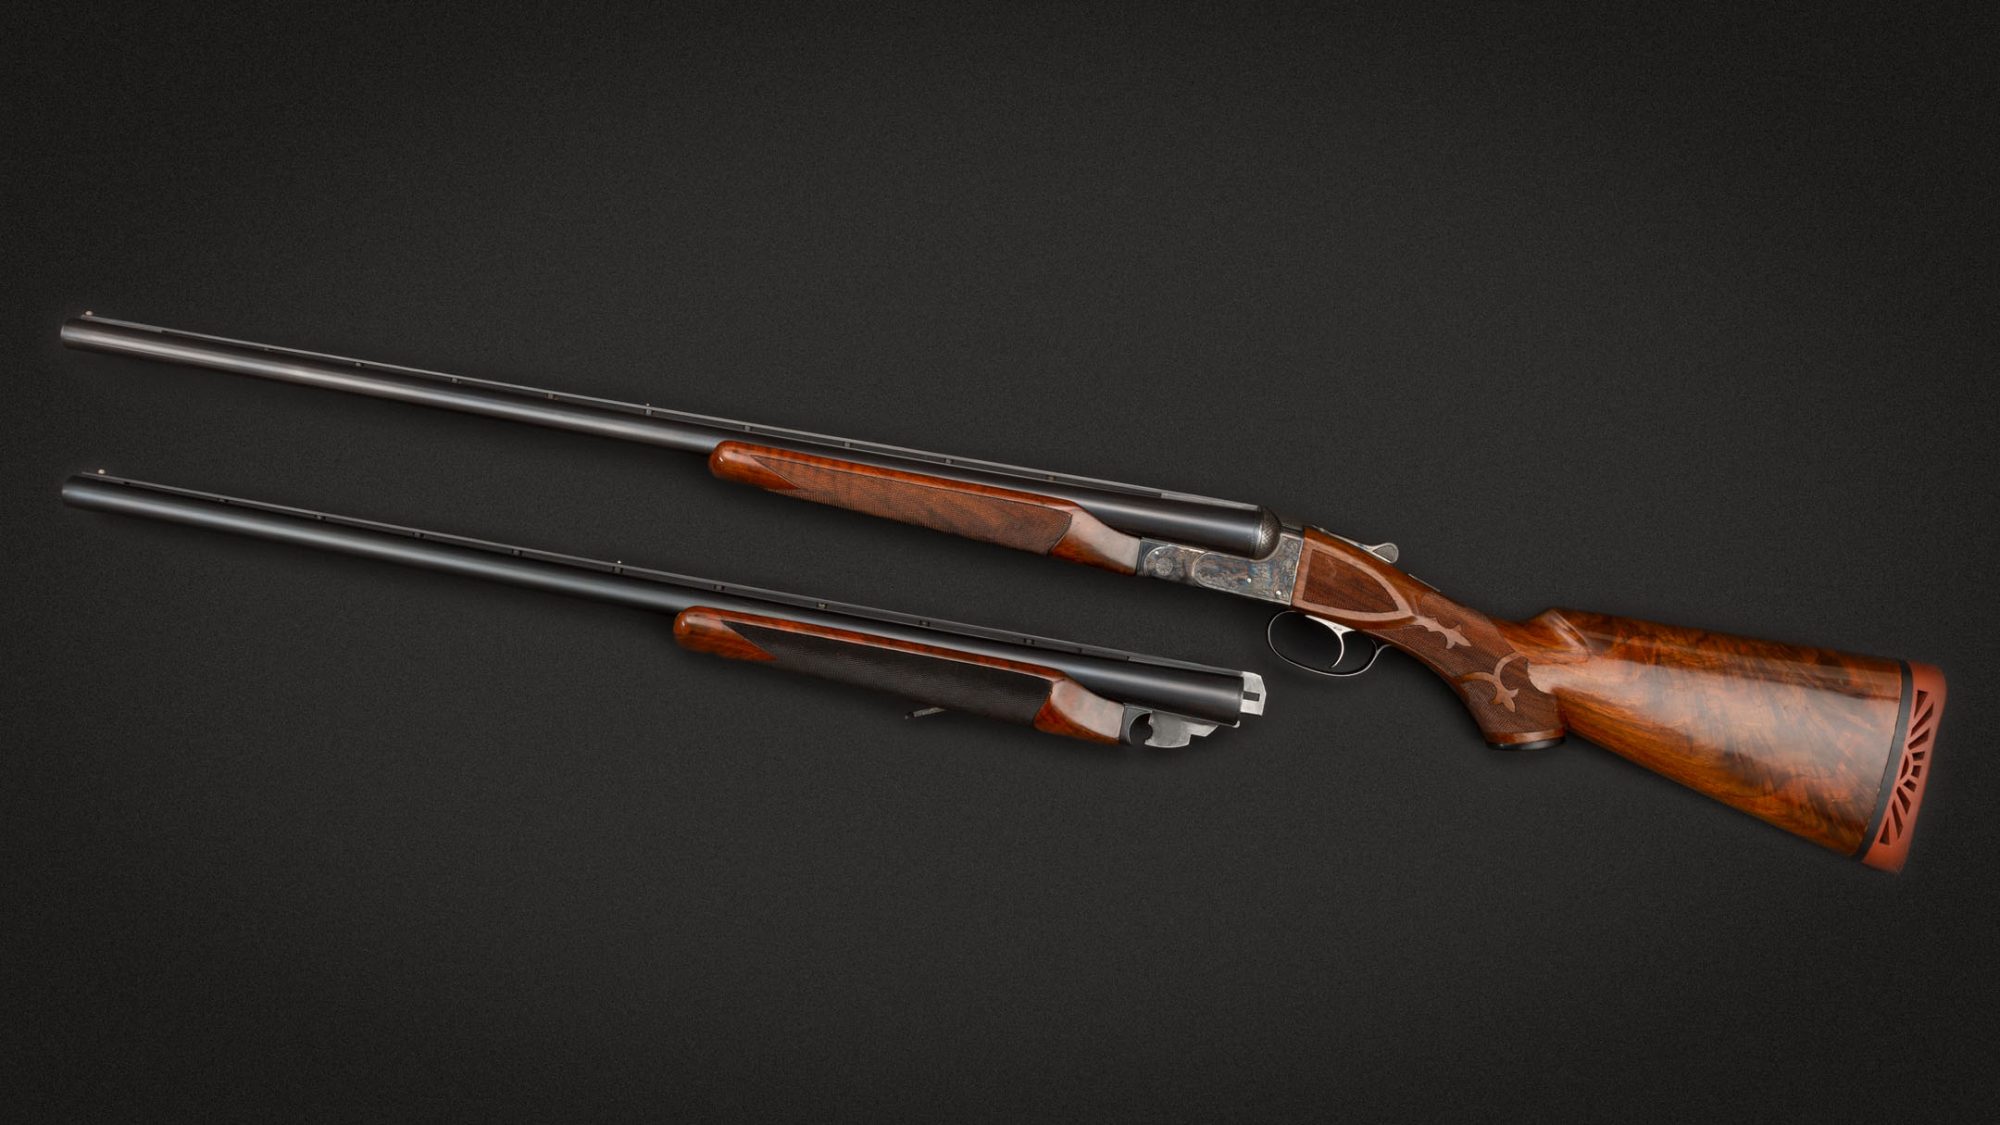 An Ithaca NID side-by-side shotgun, for sale by Turnbull Restoration of Bloomfield, NY